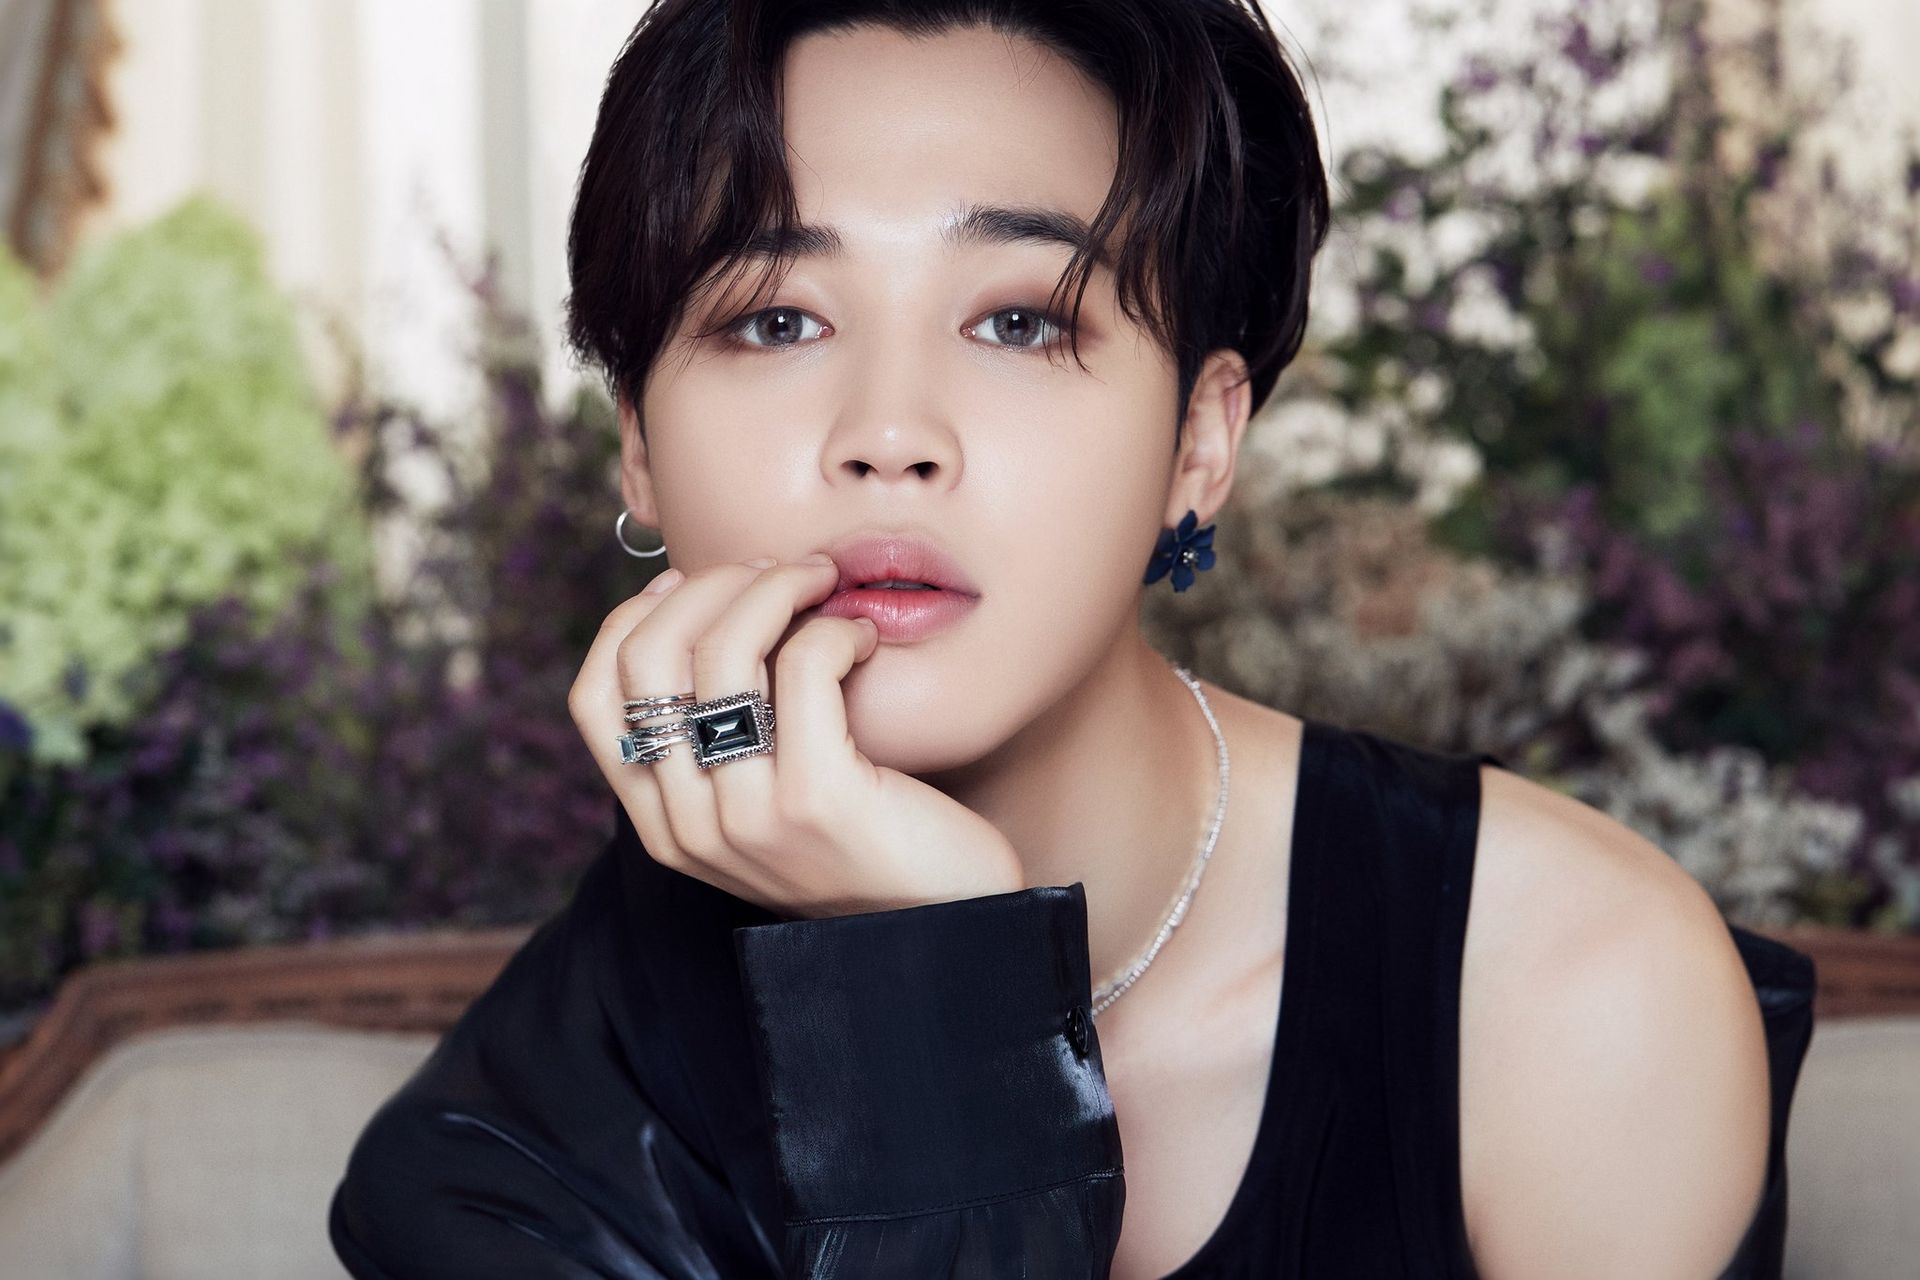 BTS Jimin phone number revealed How to connect with your favorite star